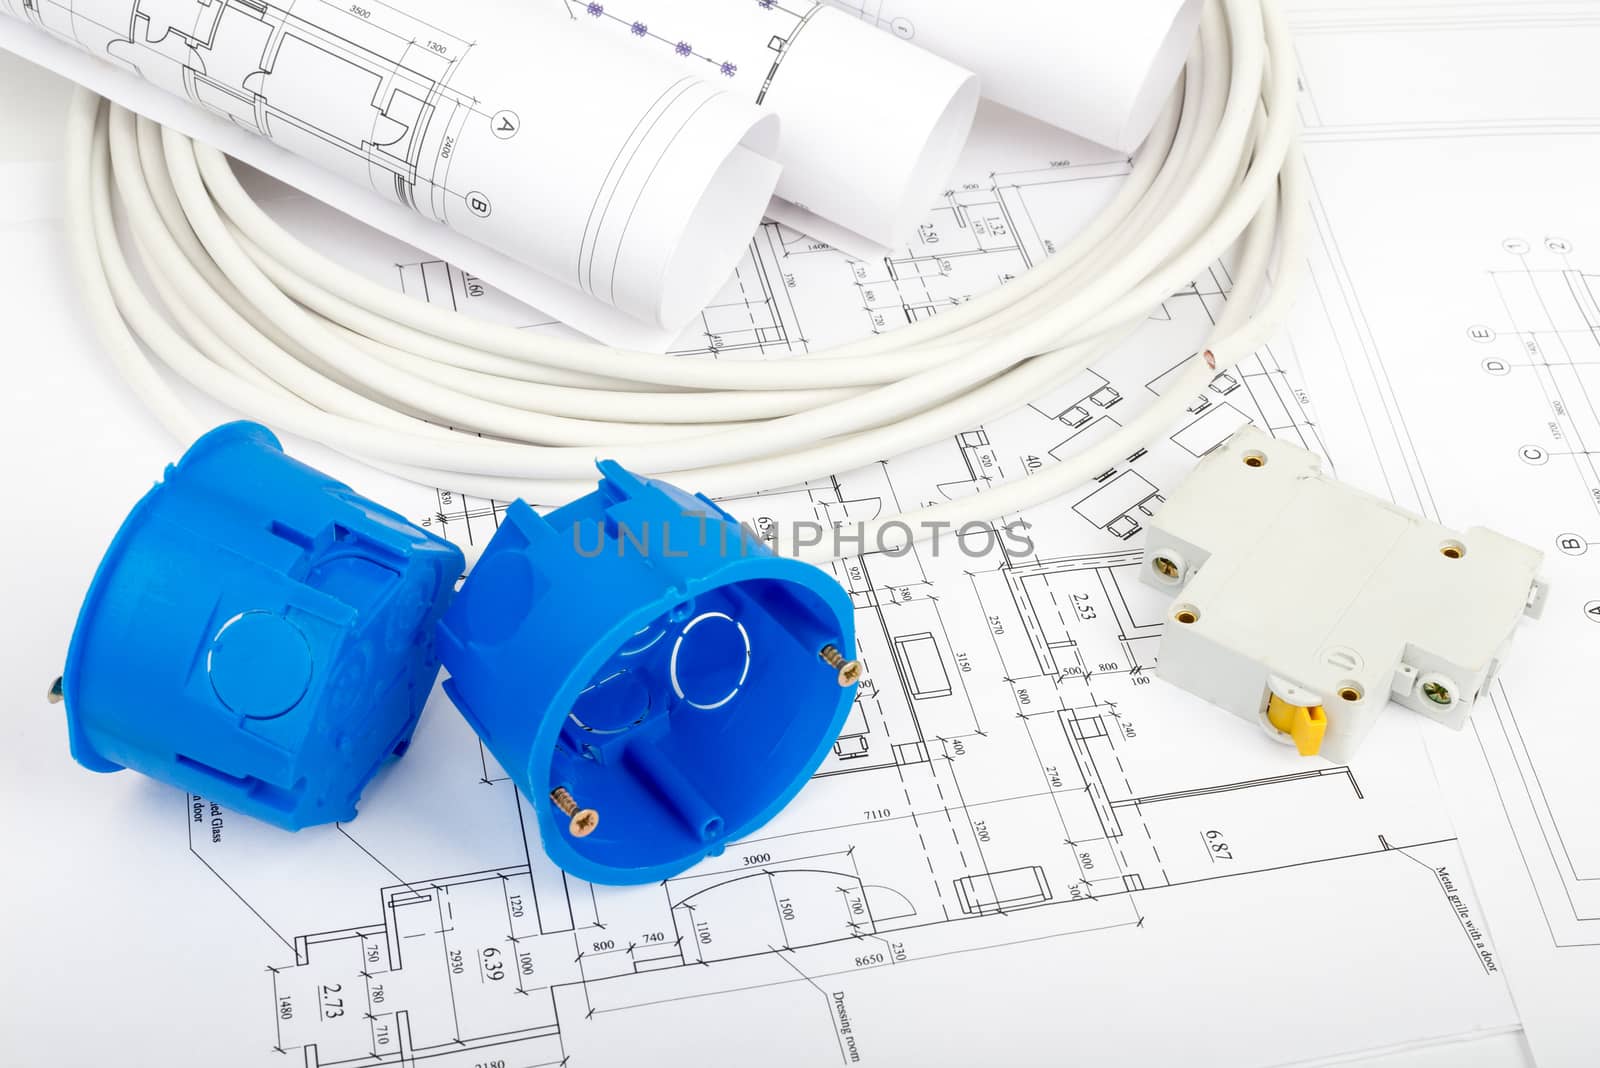 Architecture plan and rolls of blueprints with cabel and blue plastic covers, closeup. Building concept